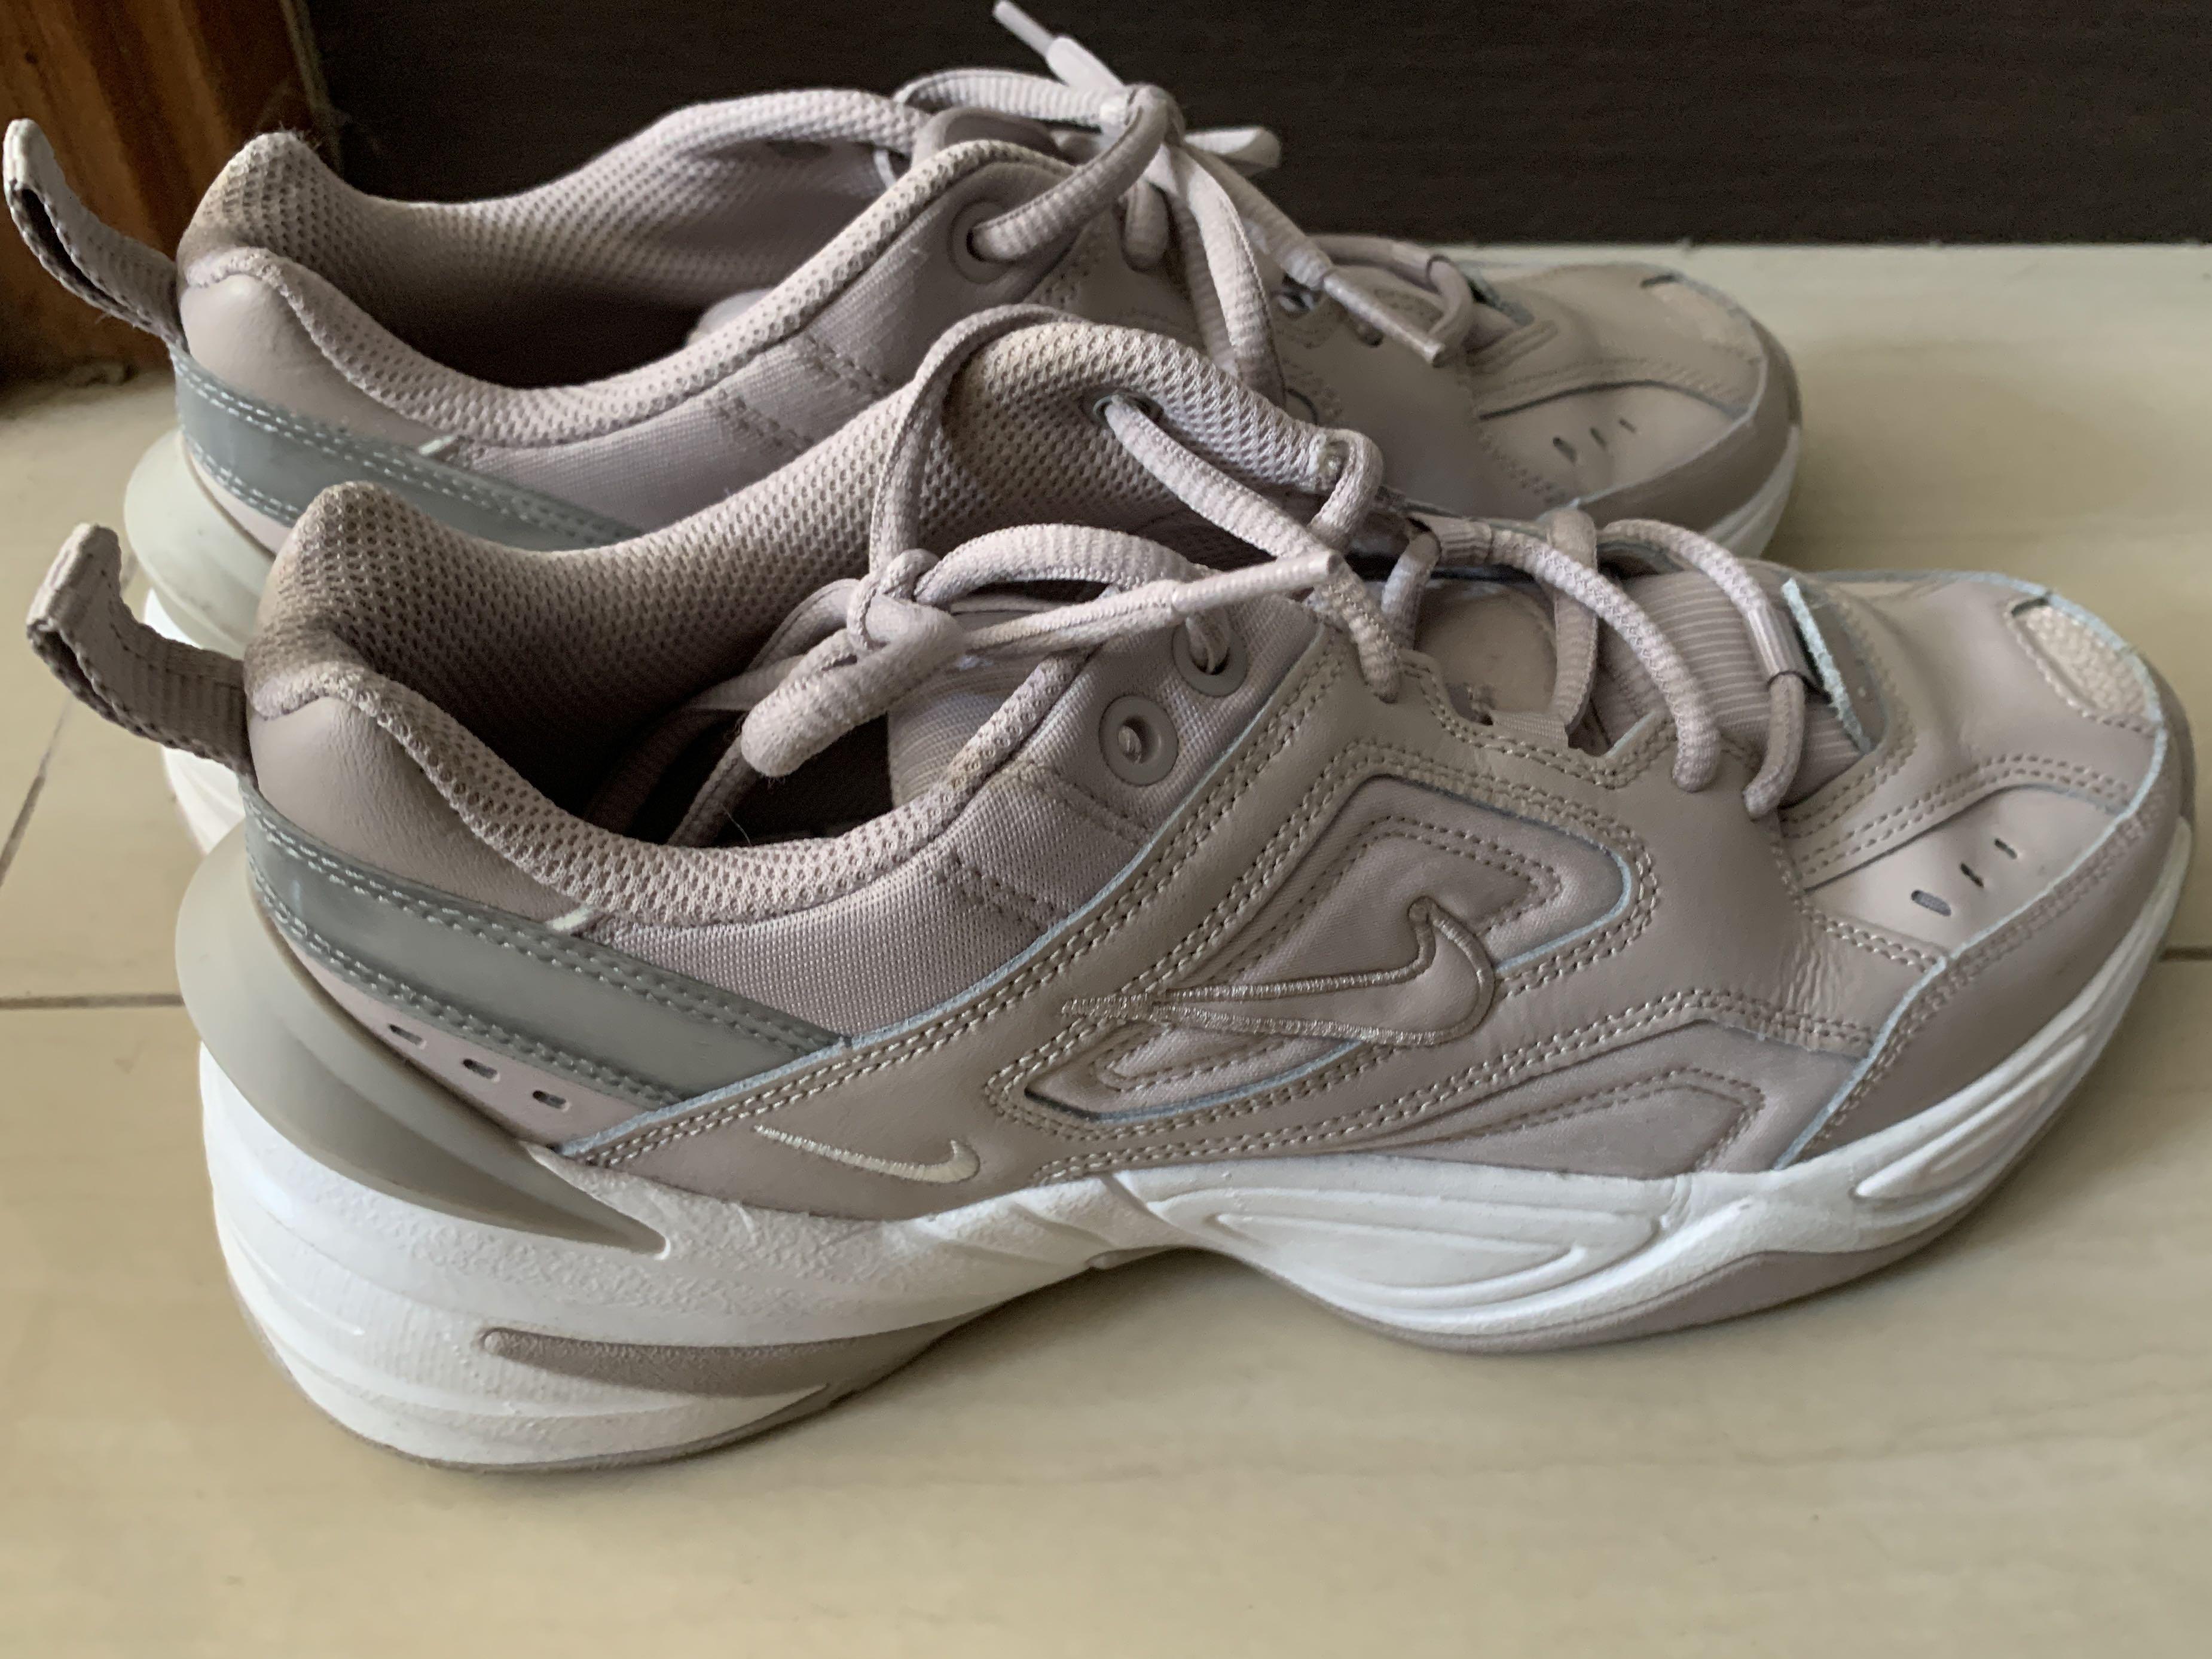 USED] nike m2k tekno (moon particle & Women's Fashion, Footwear, Carousell